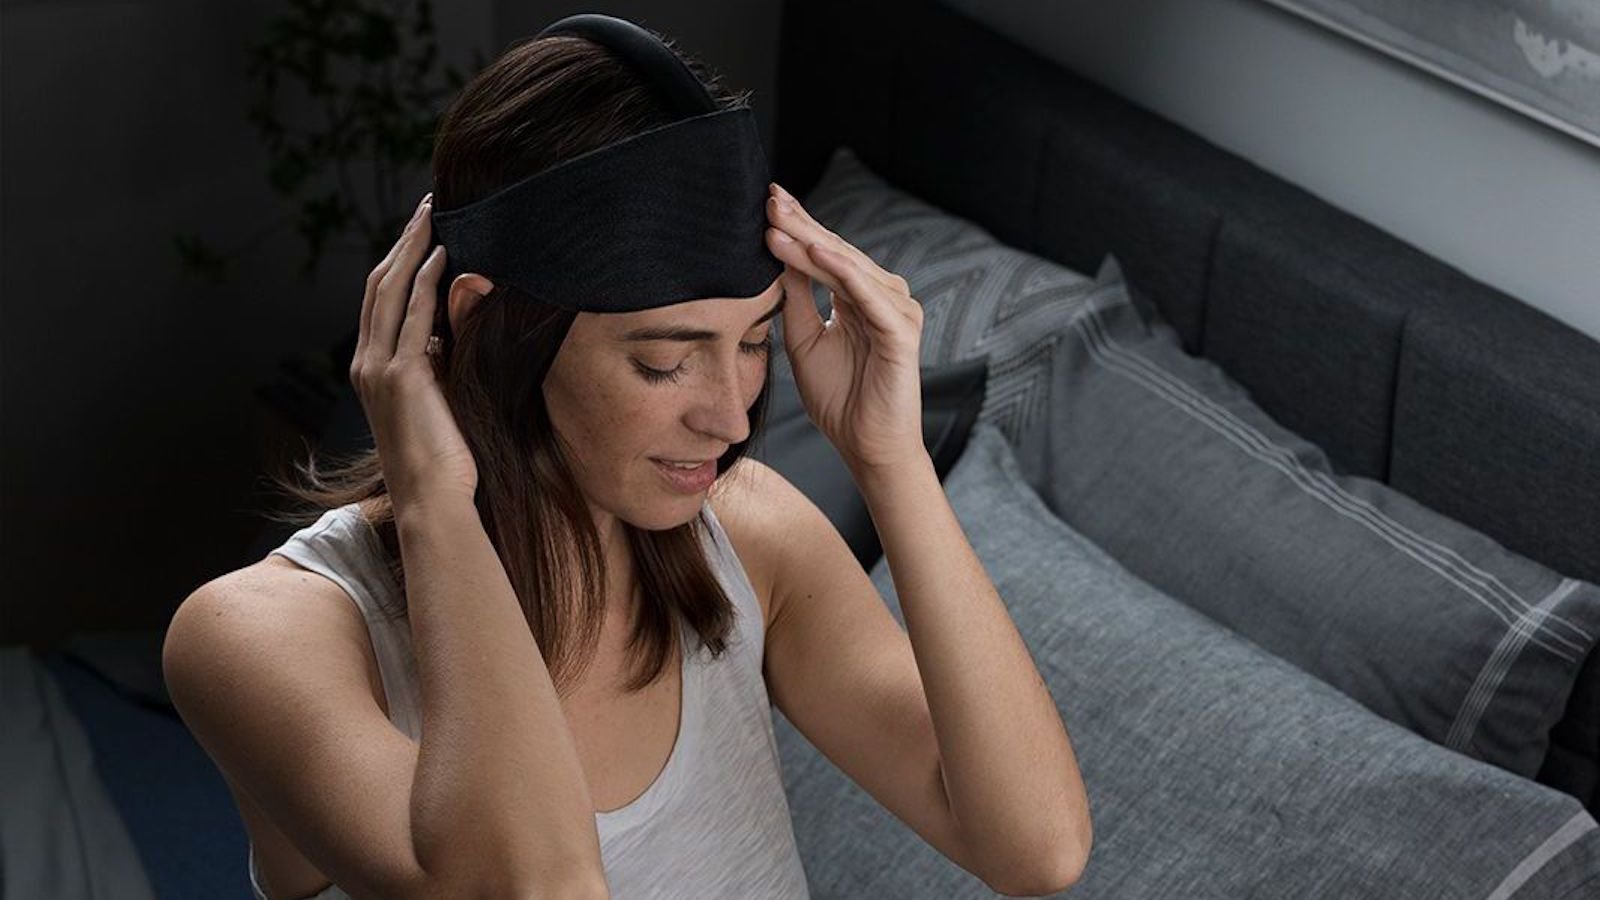 Ebb Therapeutics ComfortBand Sleep Eye Mask helps you to have a restful night